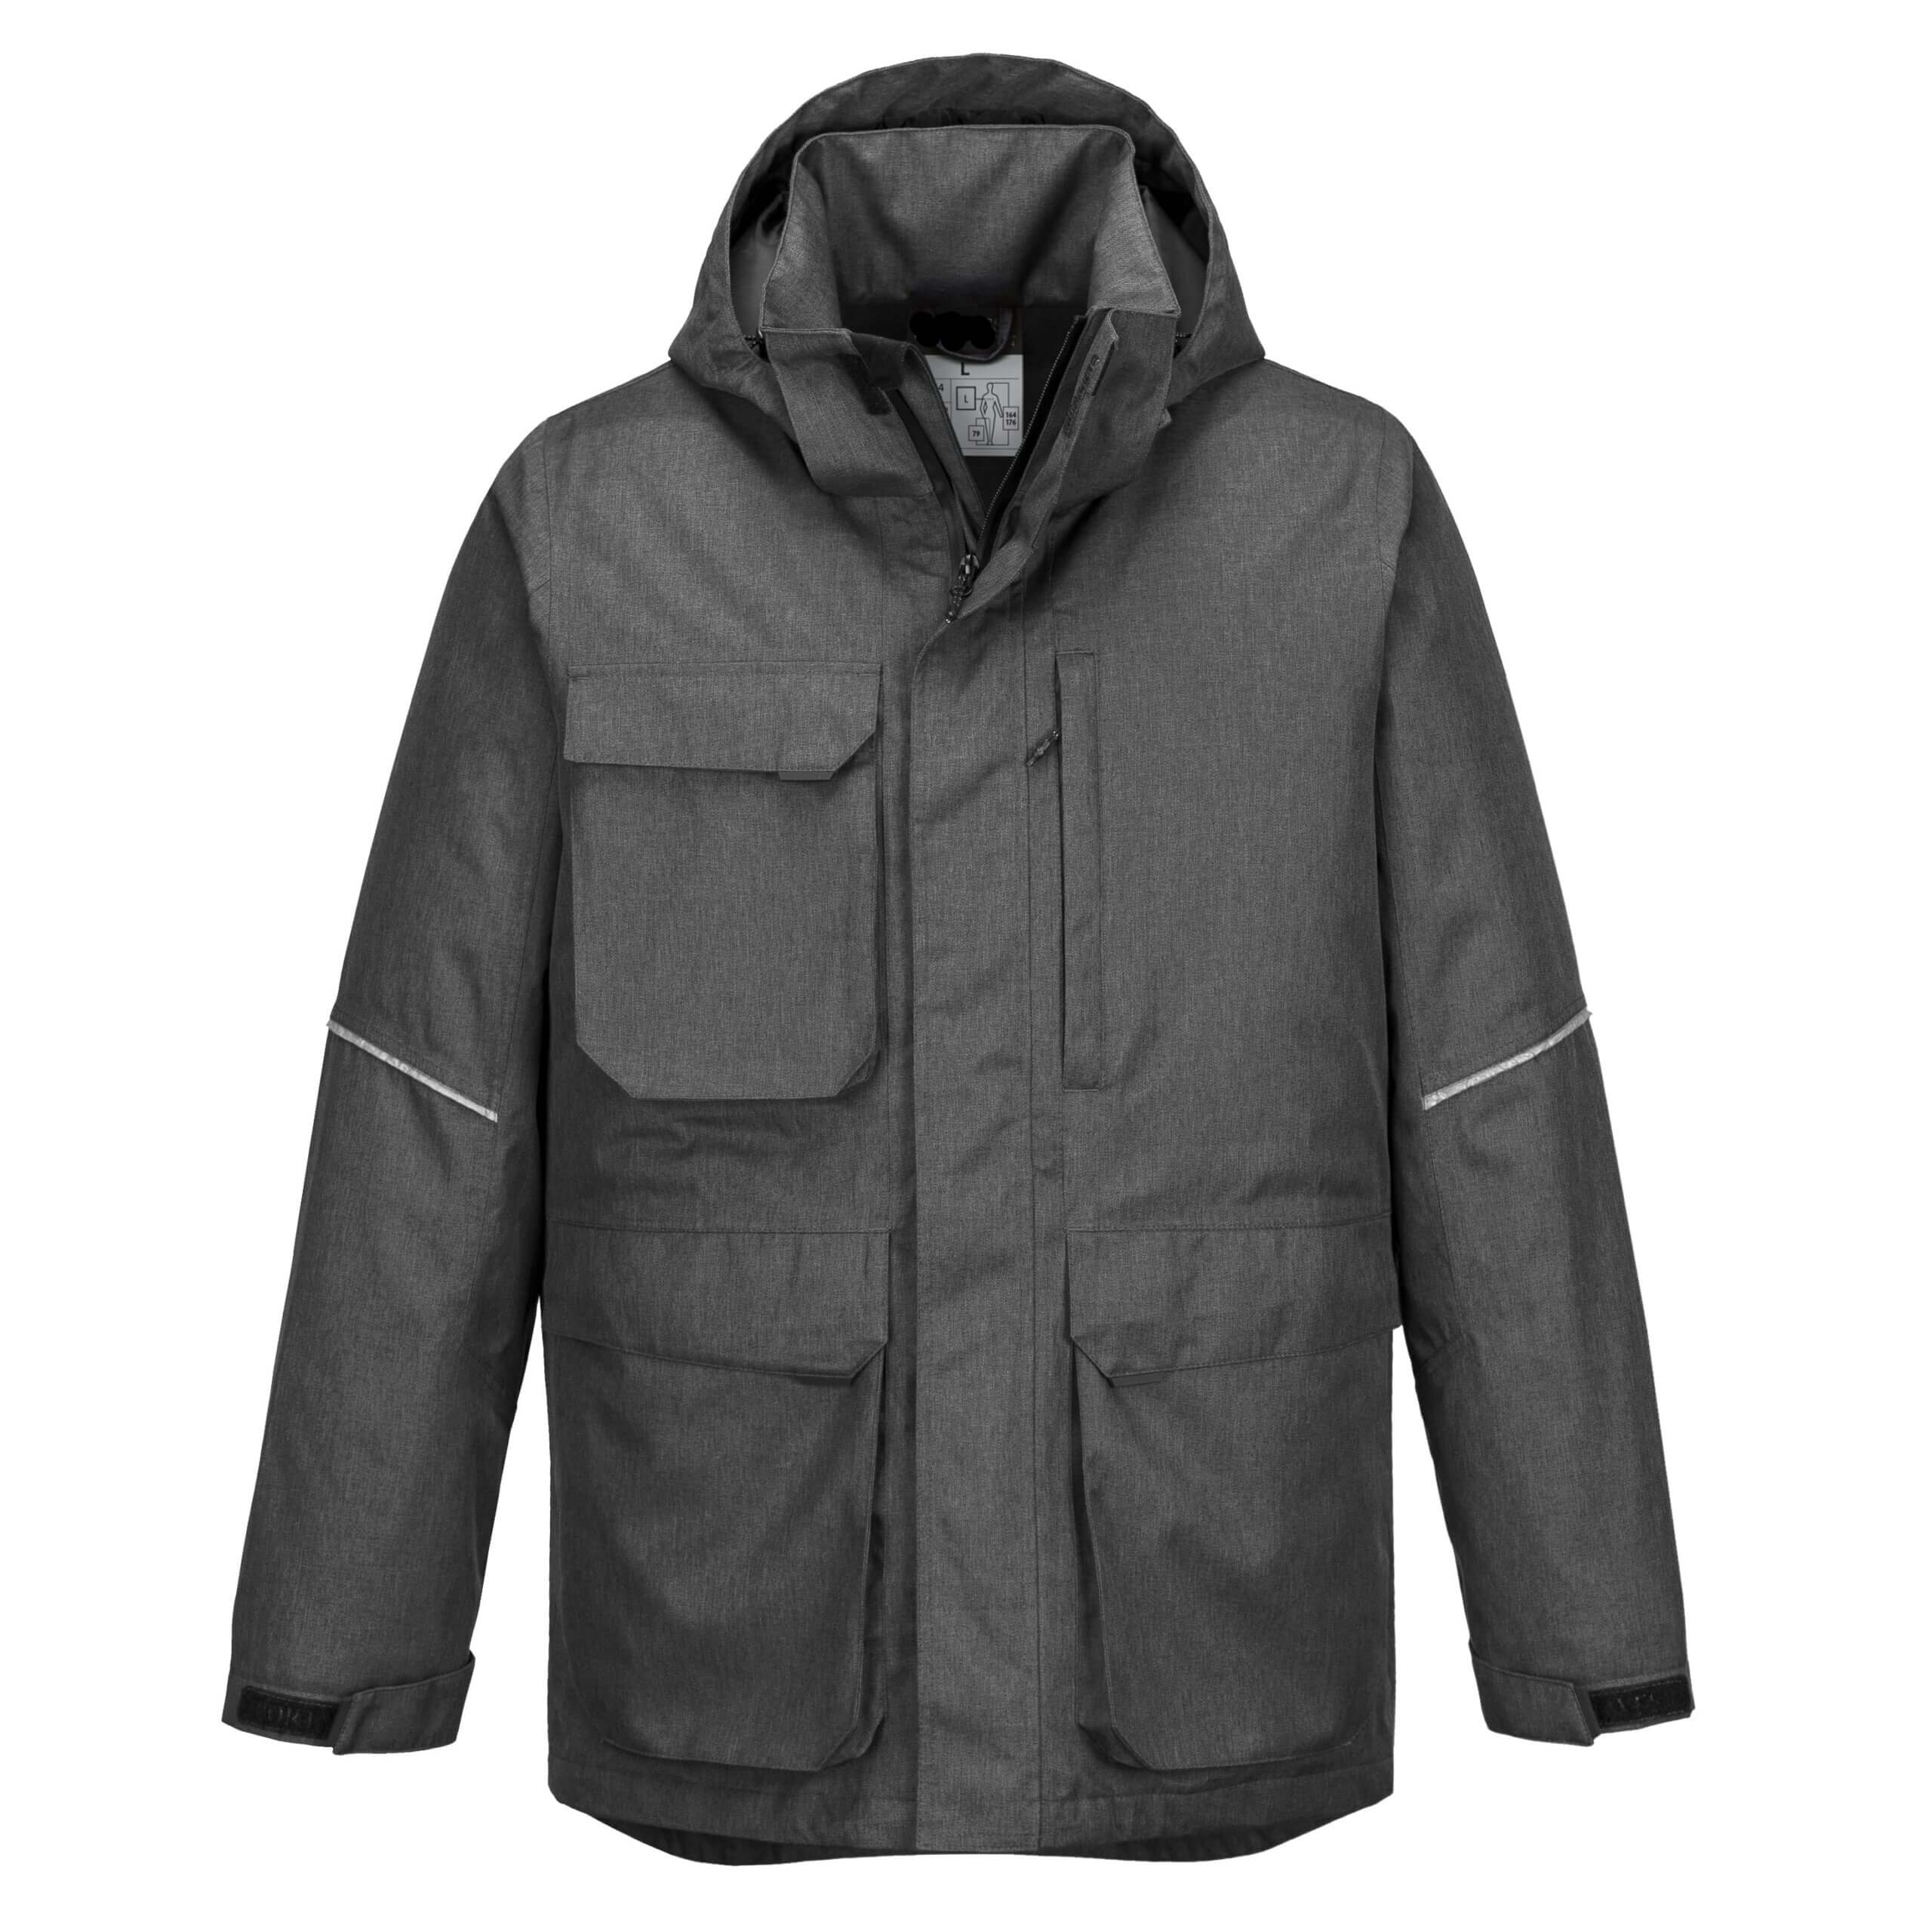 Insulated PX Parka Jacket, PX360